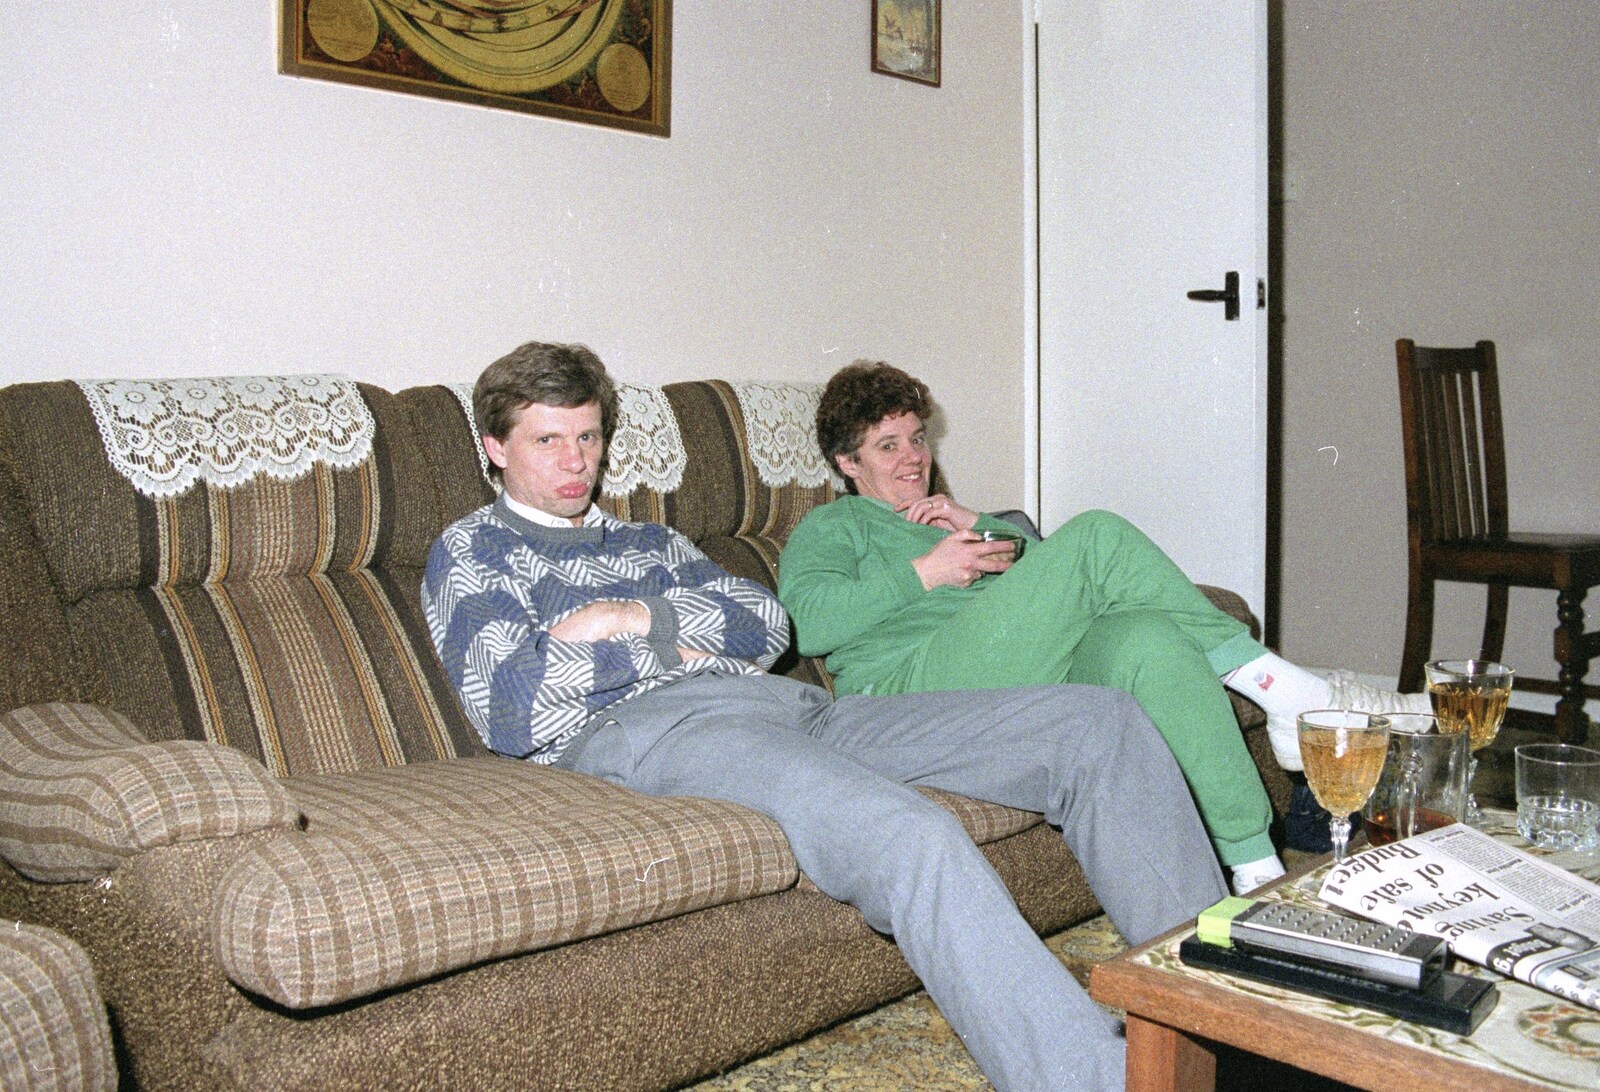 Steve-o and Crispy on Ken's sofa from Kenny's Nibbles, St. Paul's and Sean's, Farnborough, London and Diss - 19th March 1990